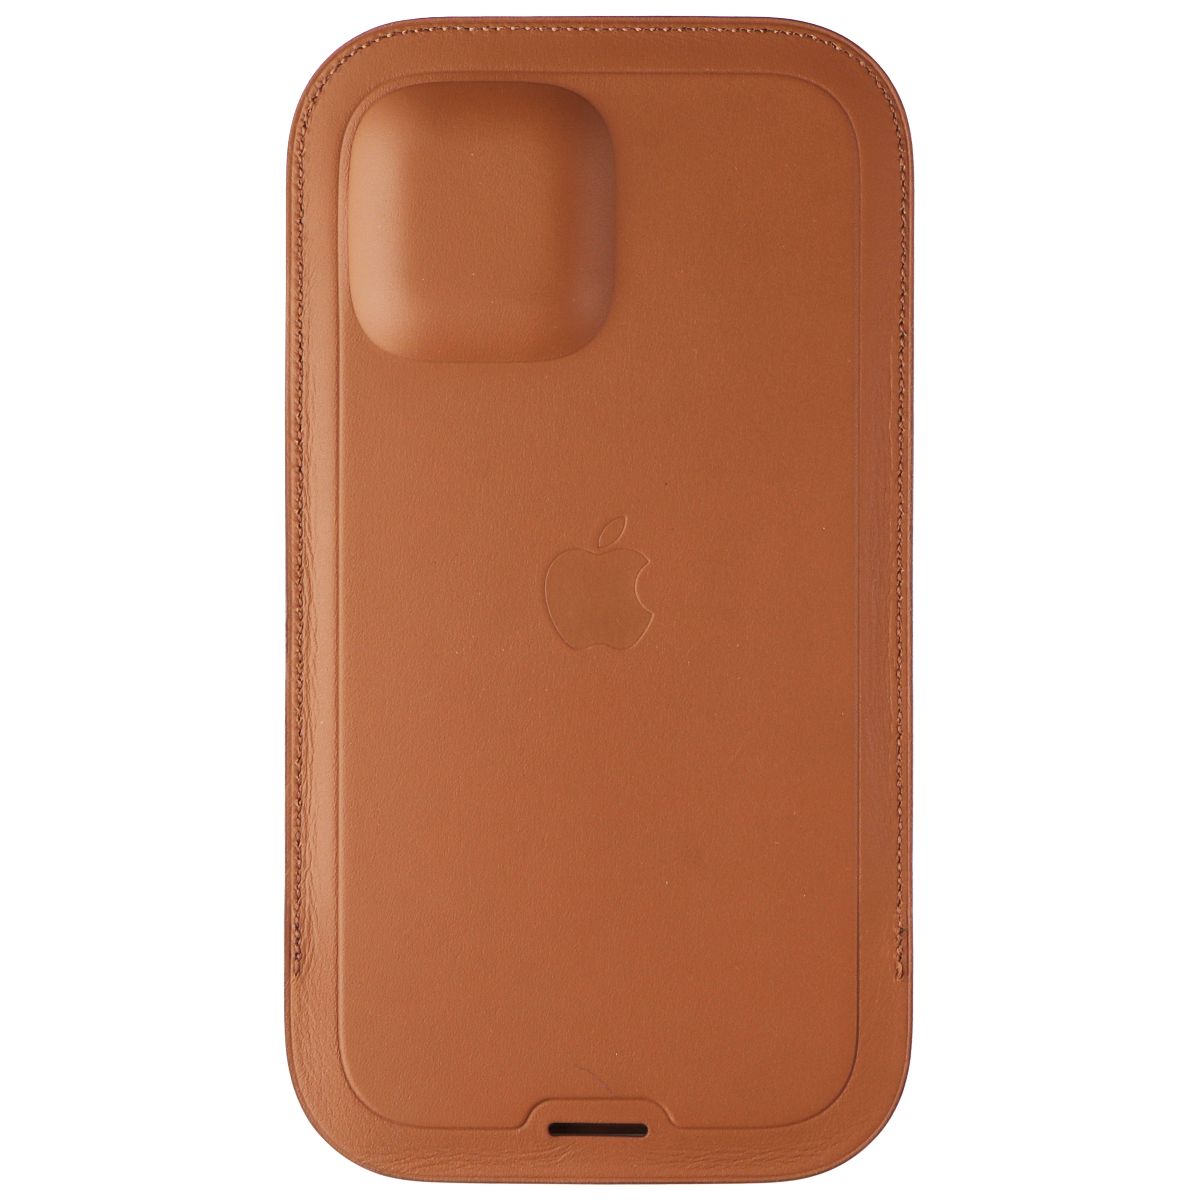 Apple Official Leather Sleeve for MagSafe for iPhone 12 Pro Max - Saddle Brown